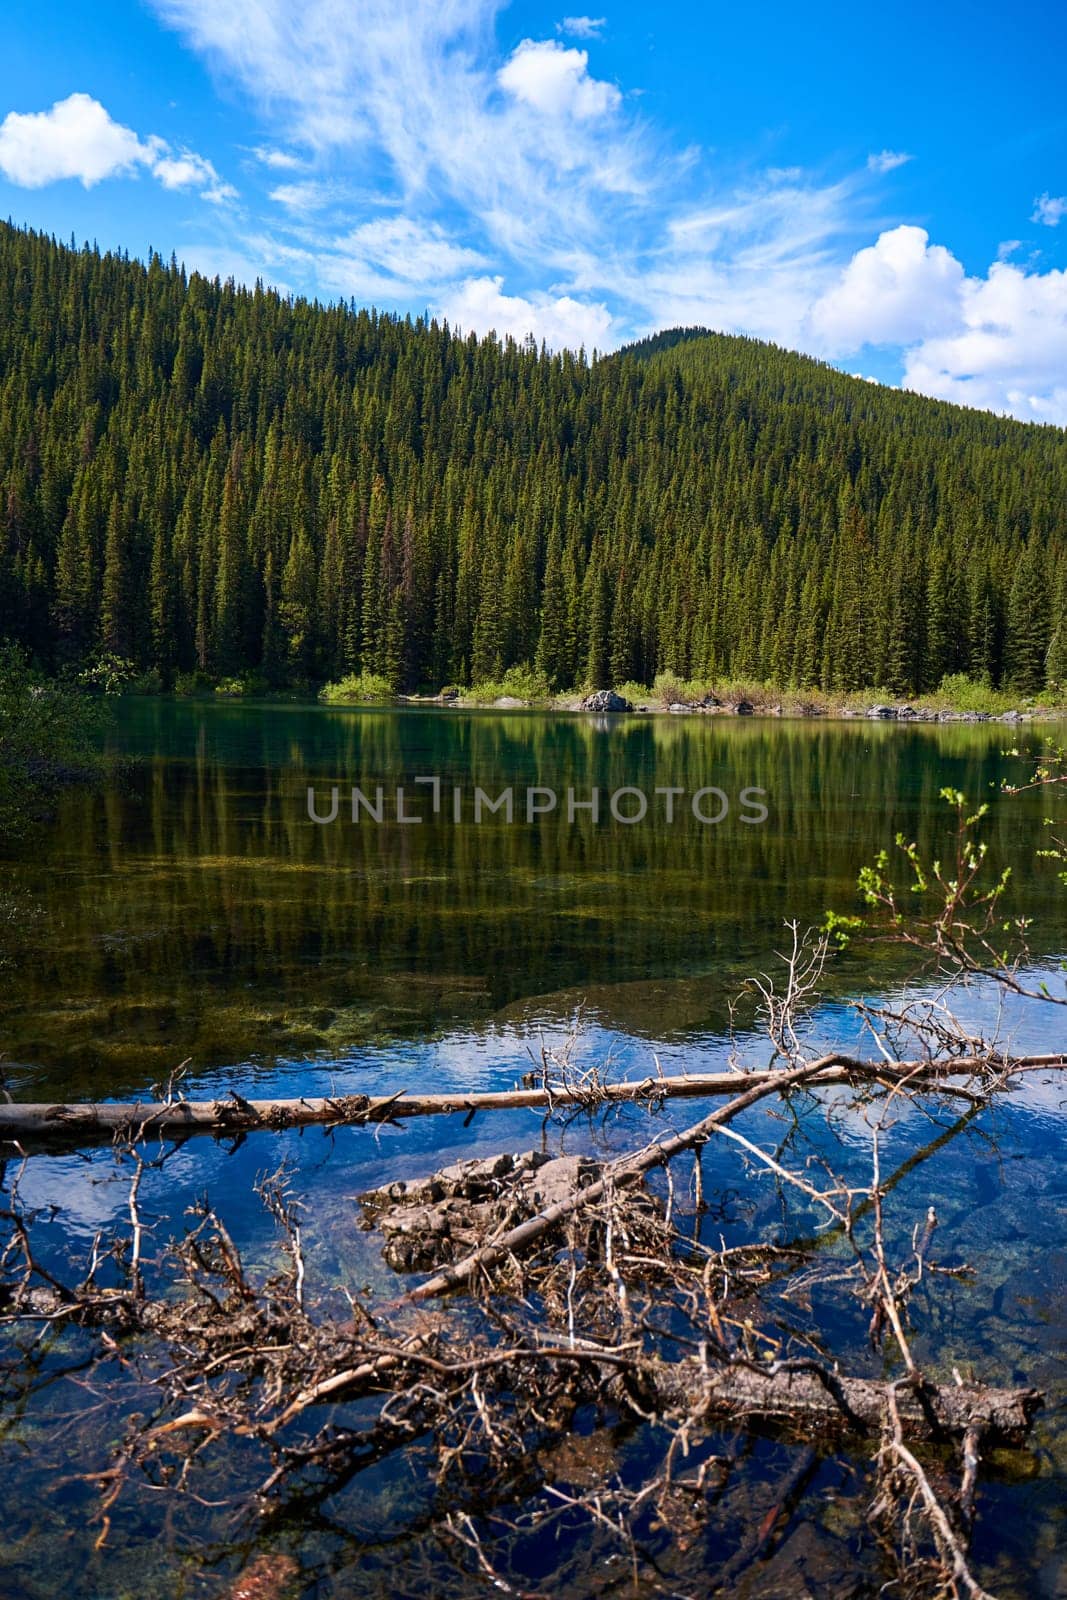 Incredibly beautiful transparent, emerald calm lake with reflection of rocky mountain on the Black Prince Cirque Trail. An old dry coniferous tree fell in a mountain forest on the shore of a lake. by Try_my_best